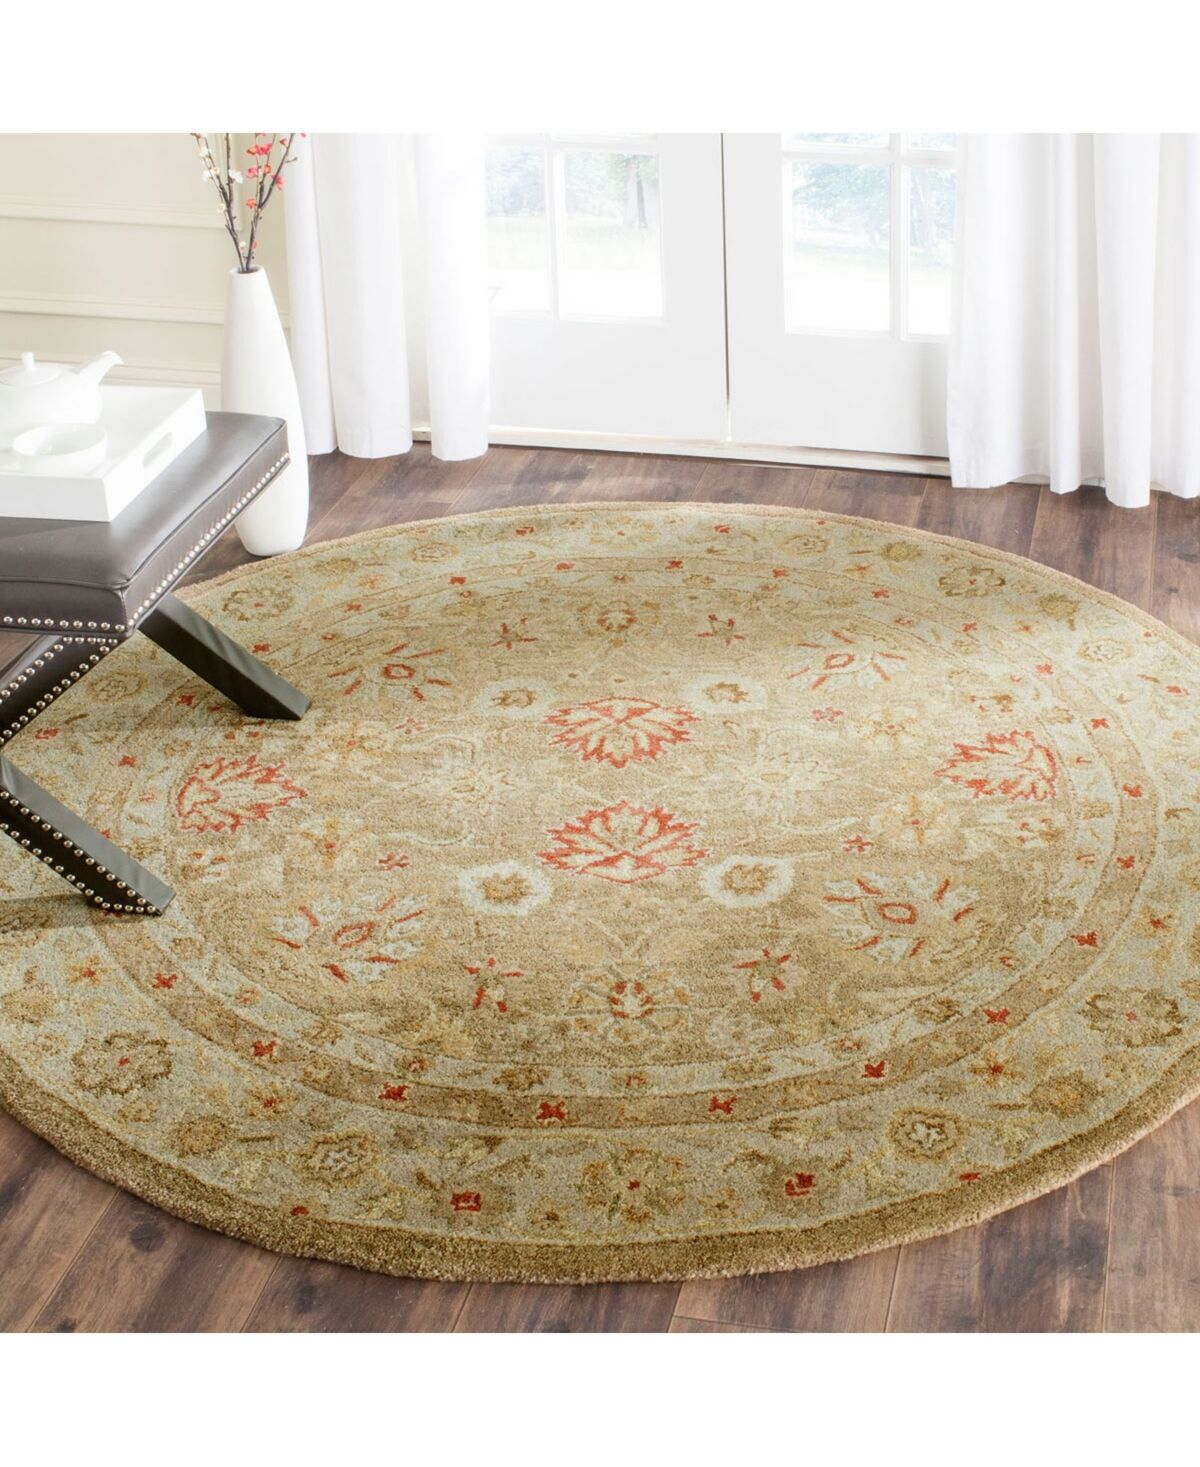 Safavieh Antiquity At822 Brown 8' x 8' Round Area Rug - Brown